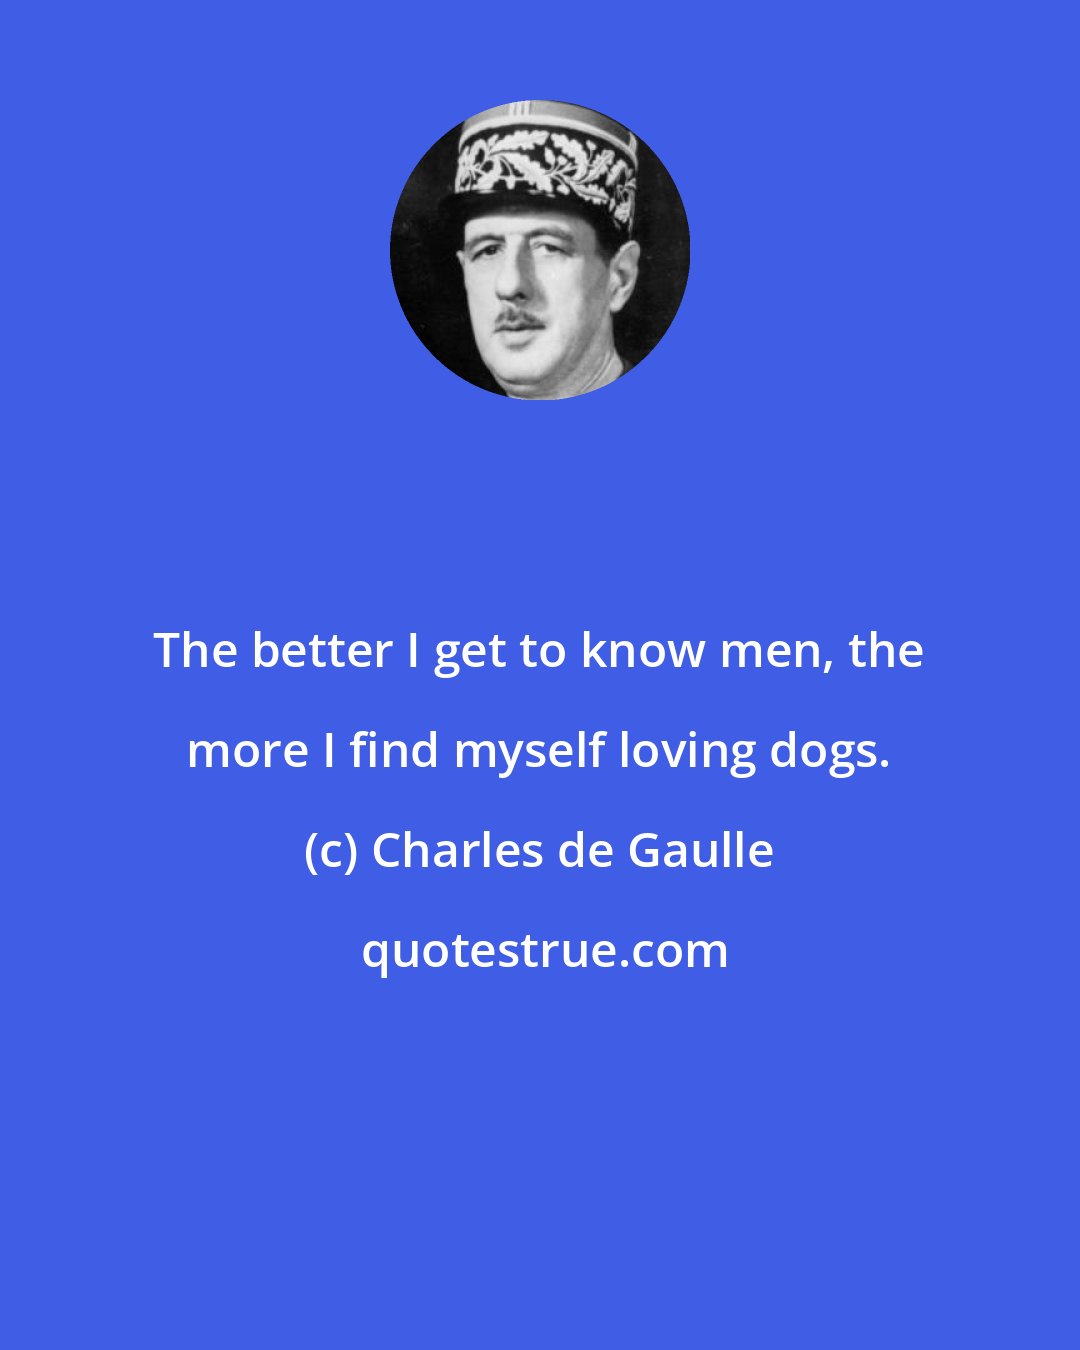 Charles de Gaulle: The better I get to know men, the more I find myself loving dogs.